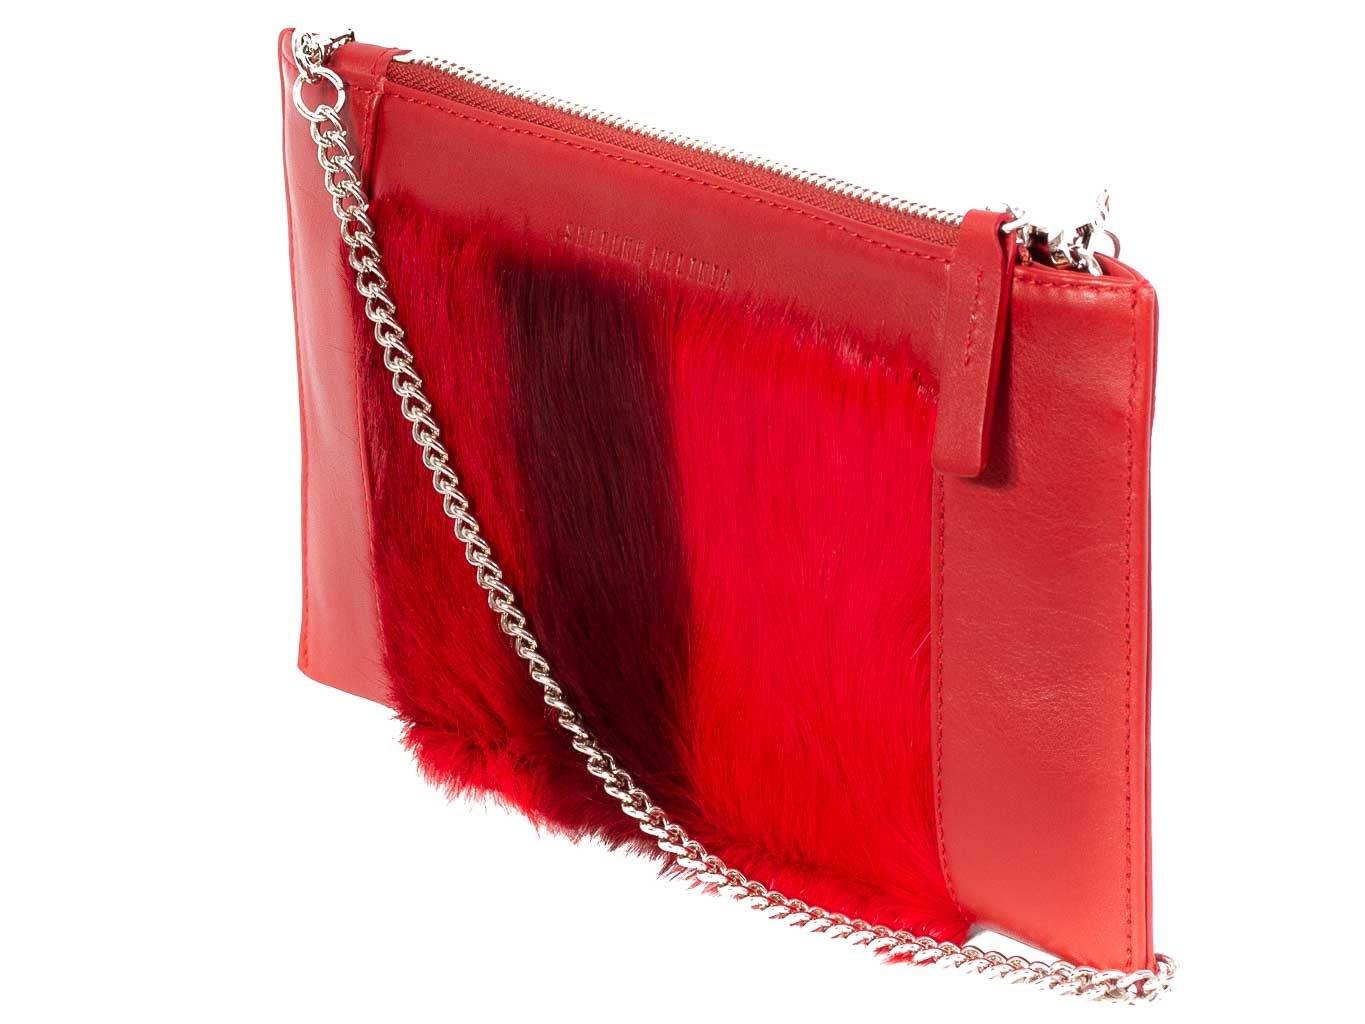 Clutch Springbok Handbag in Crimson Red with a stripe feature by Sherene Melinda front strap